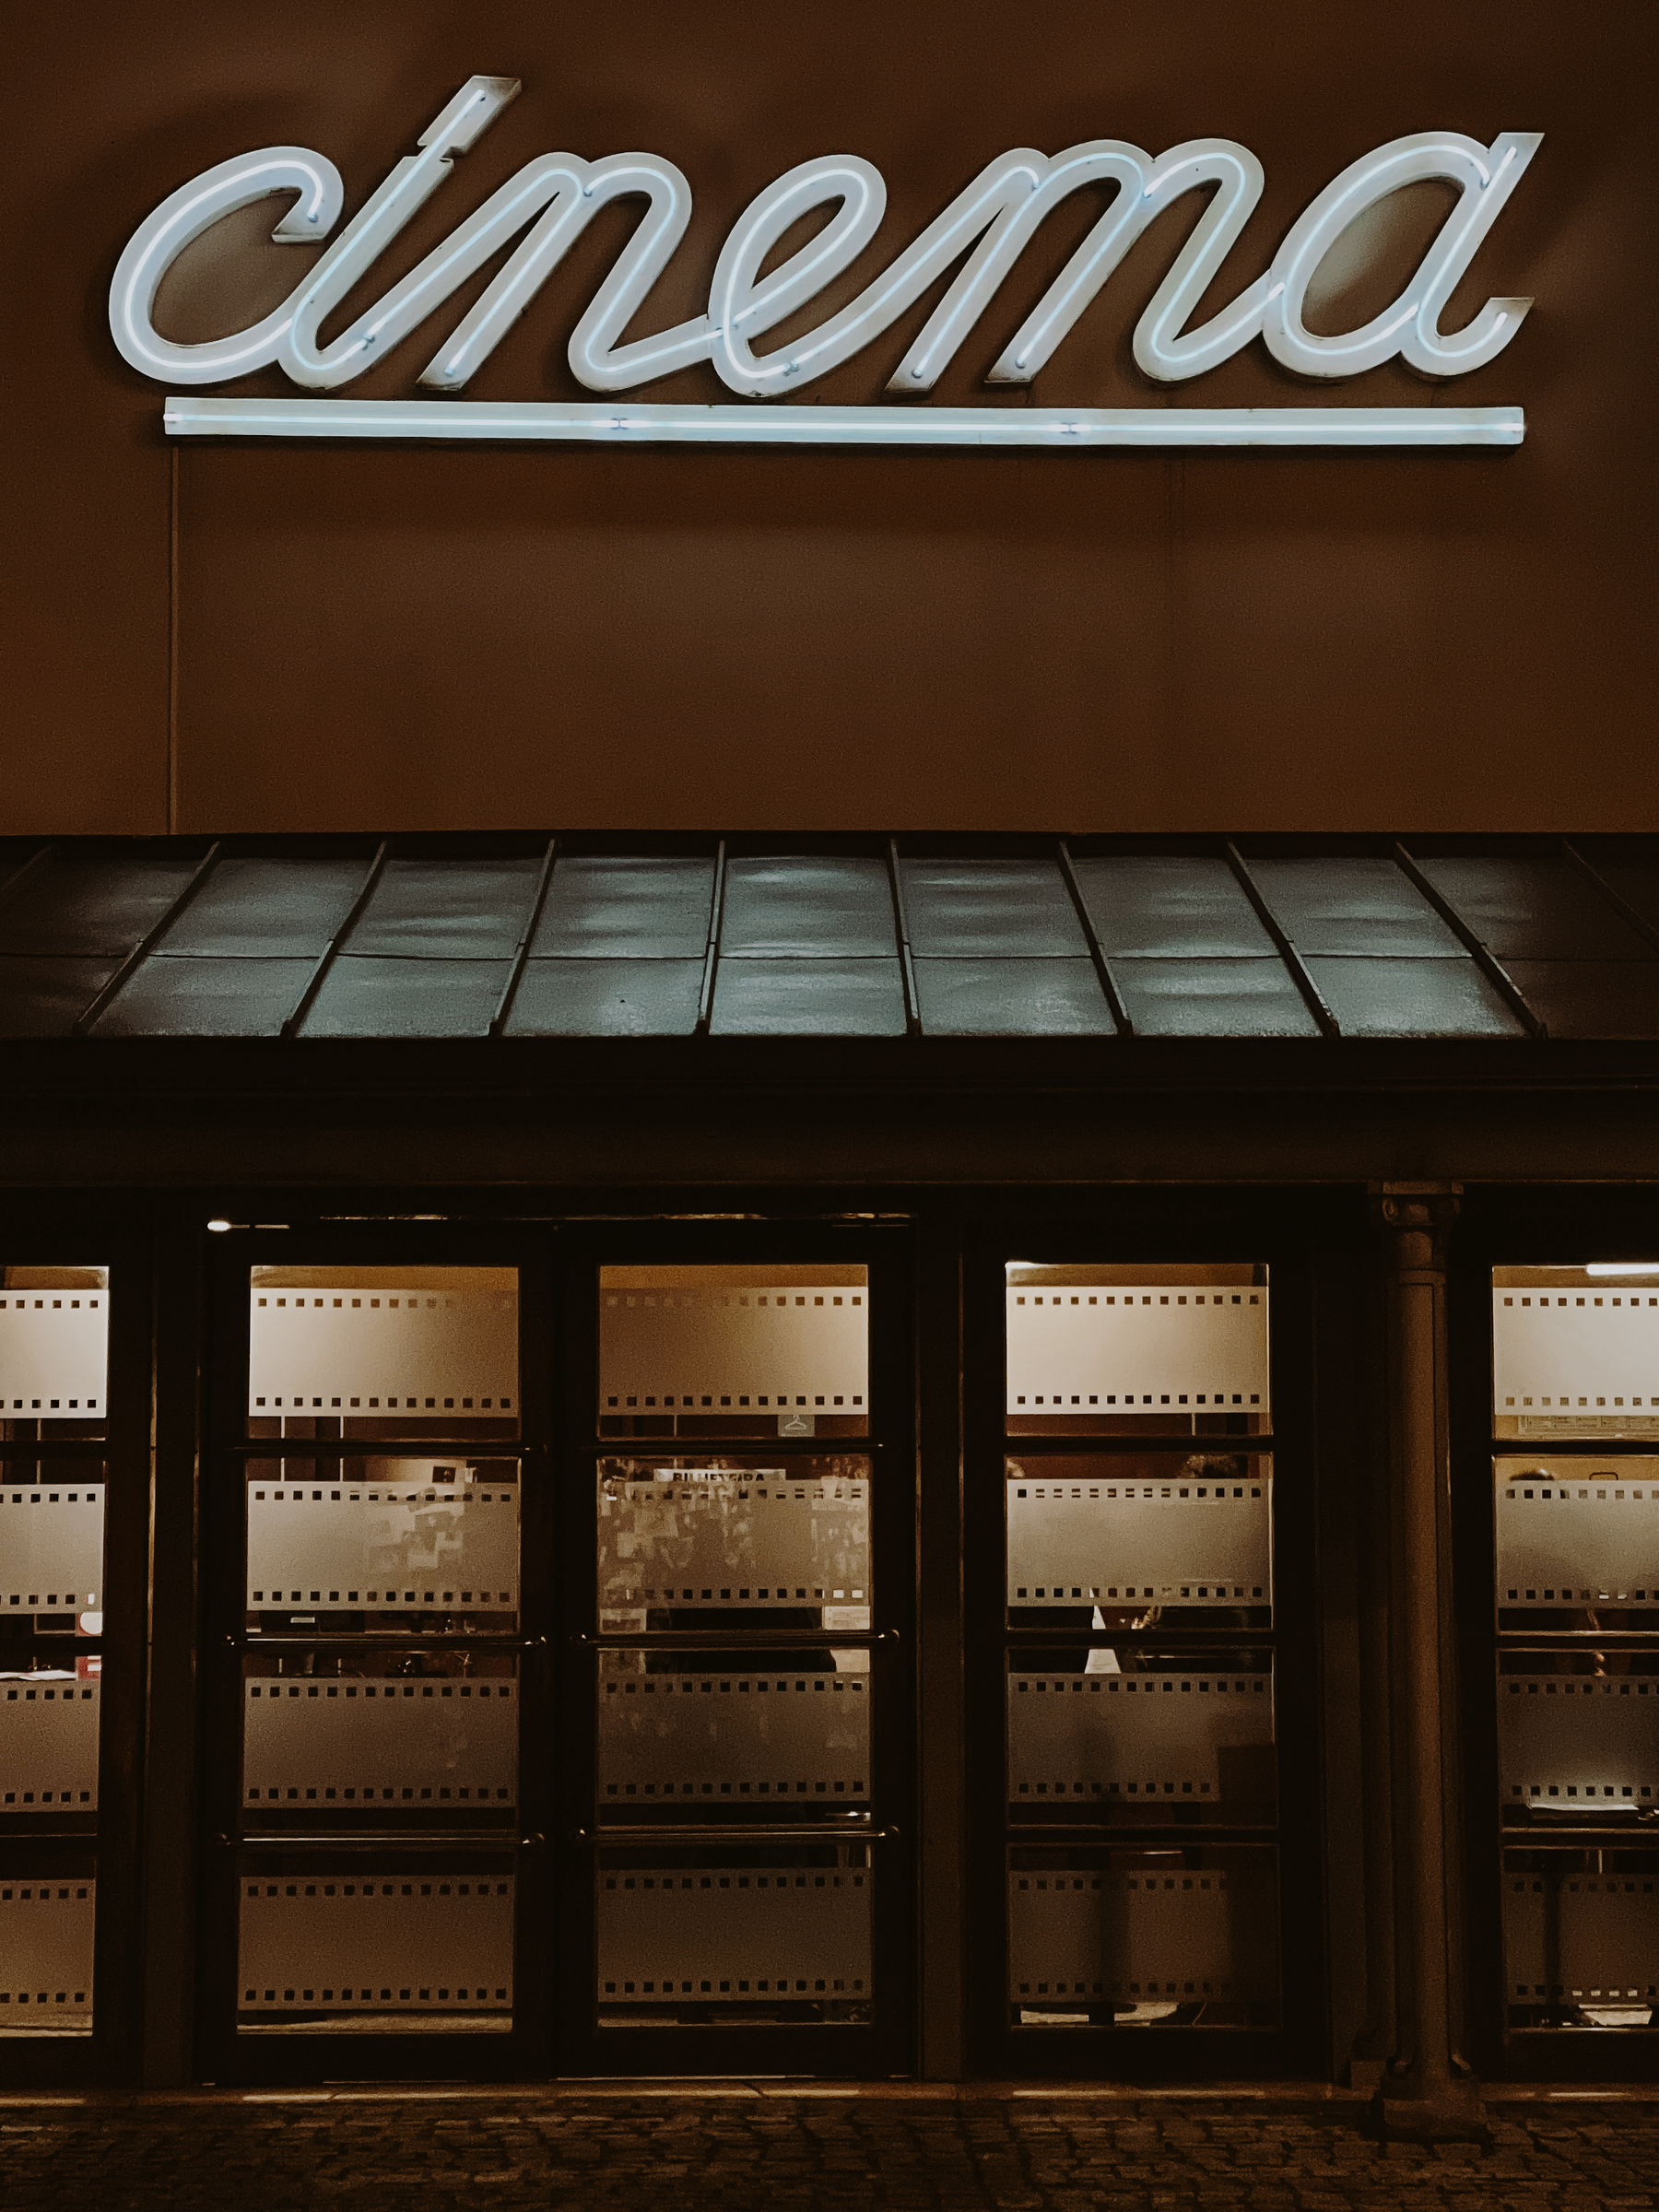 A nighttime view of a cinema entrance with a neon sign above the door. The facade is warmly lit, highlighting the sign and the front doors.